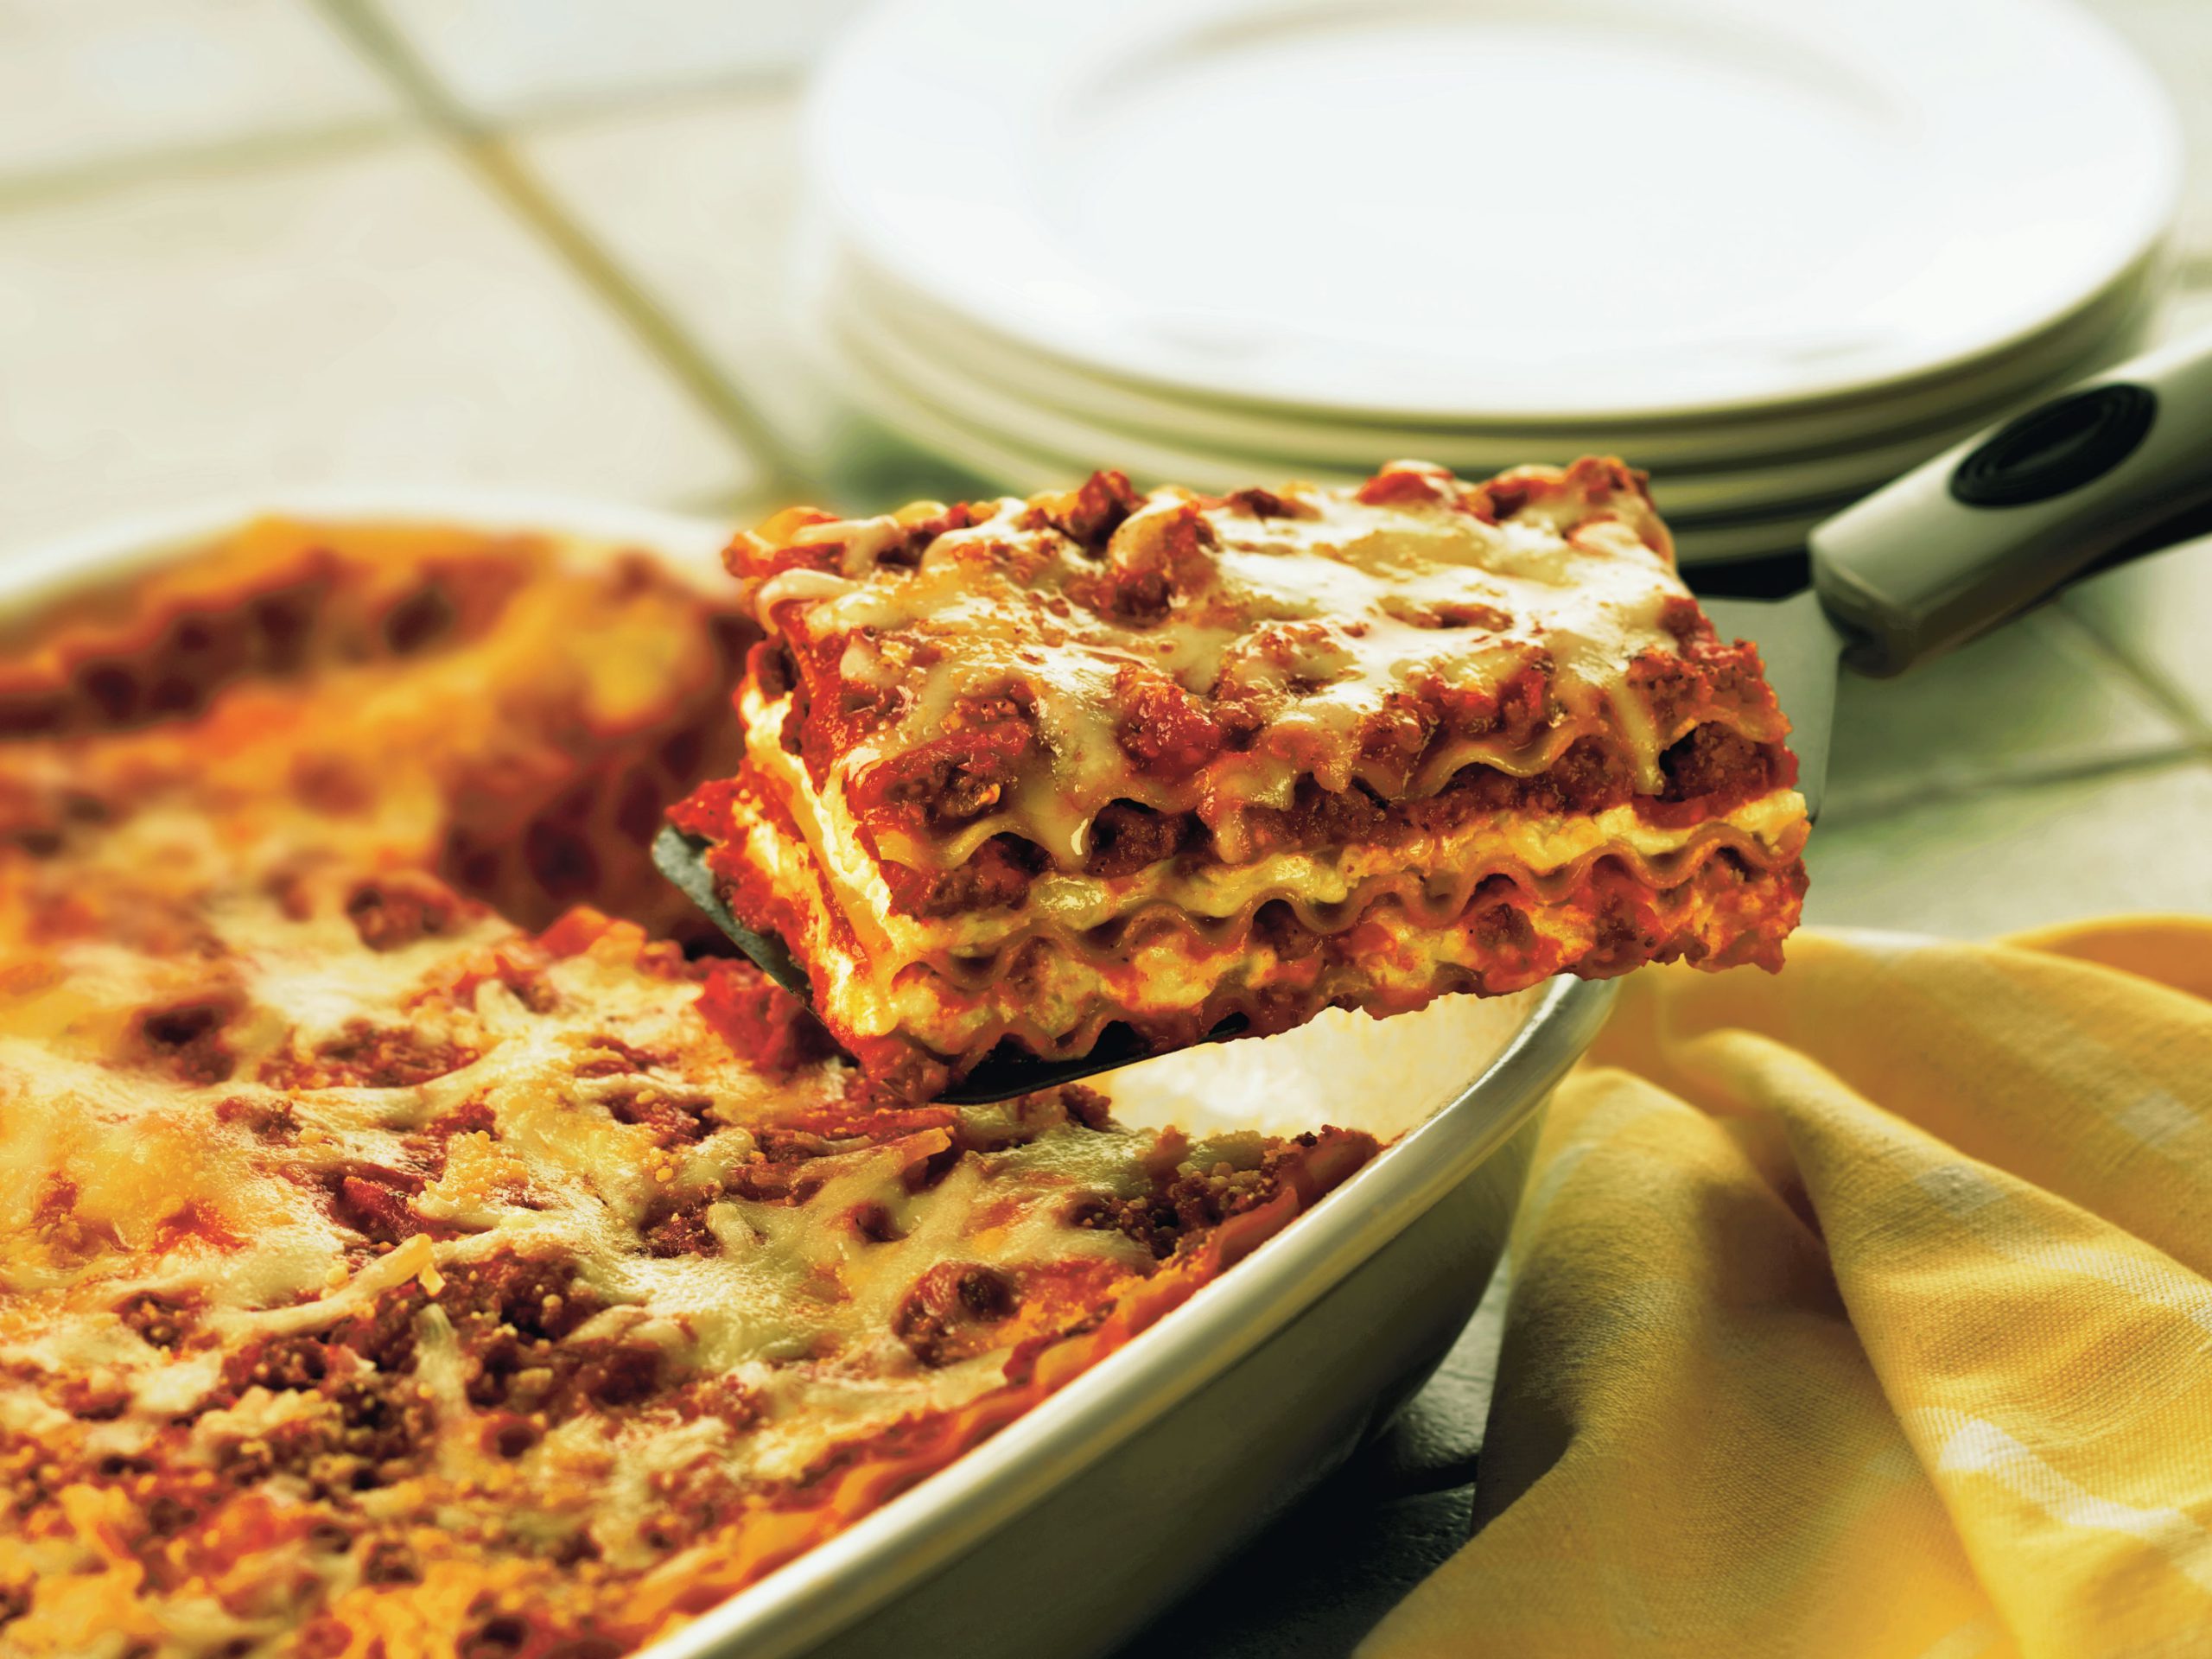 Classic sausage lasagna with layers of noodles, tomato sauce, Italian sausage, and cheese